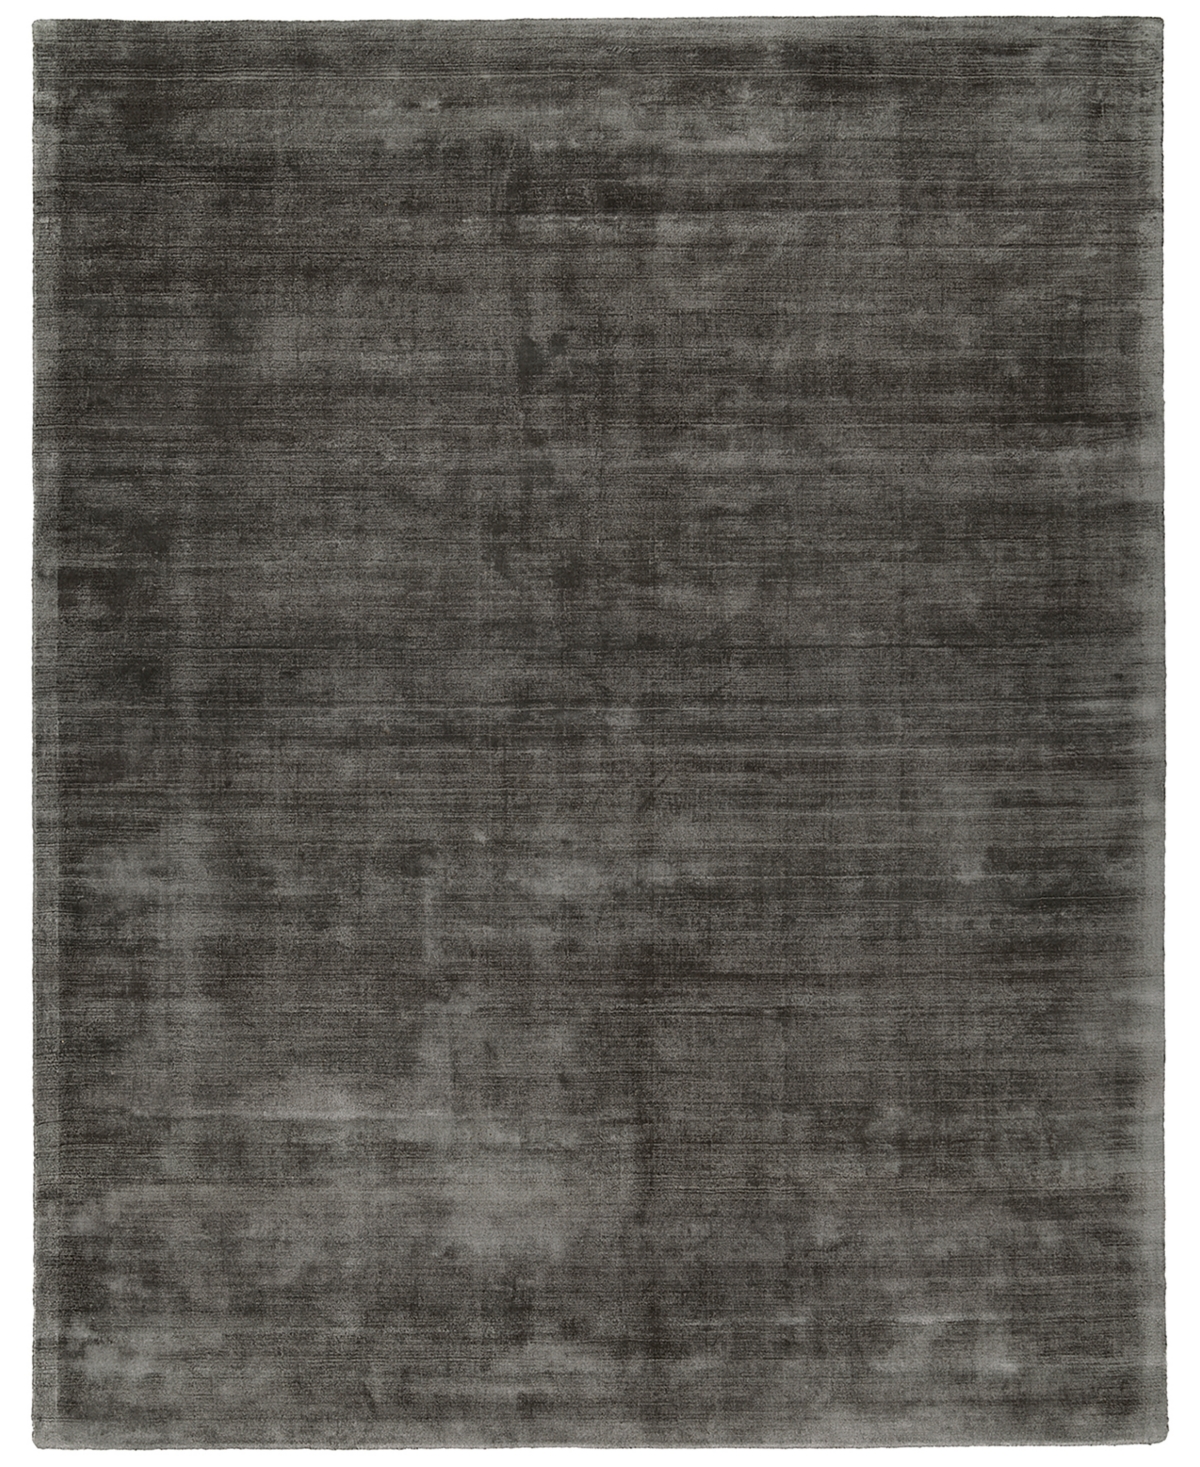 Stanton Rug Company Sienna Sn100 8' X 10' Area Rug In Brown